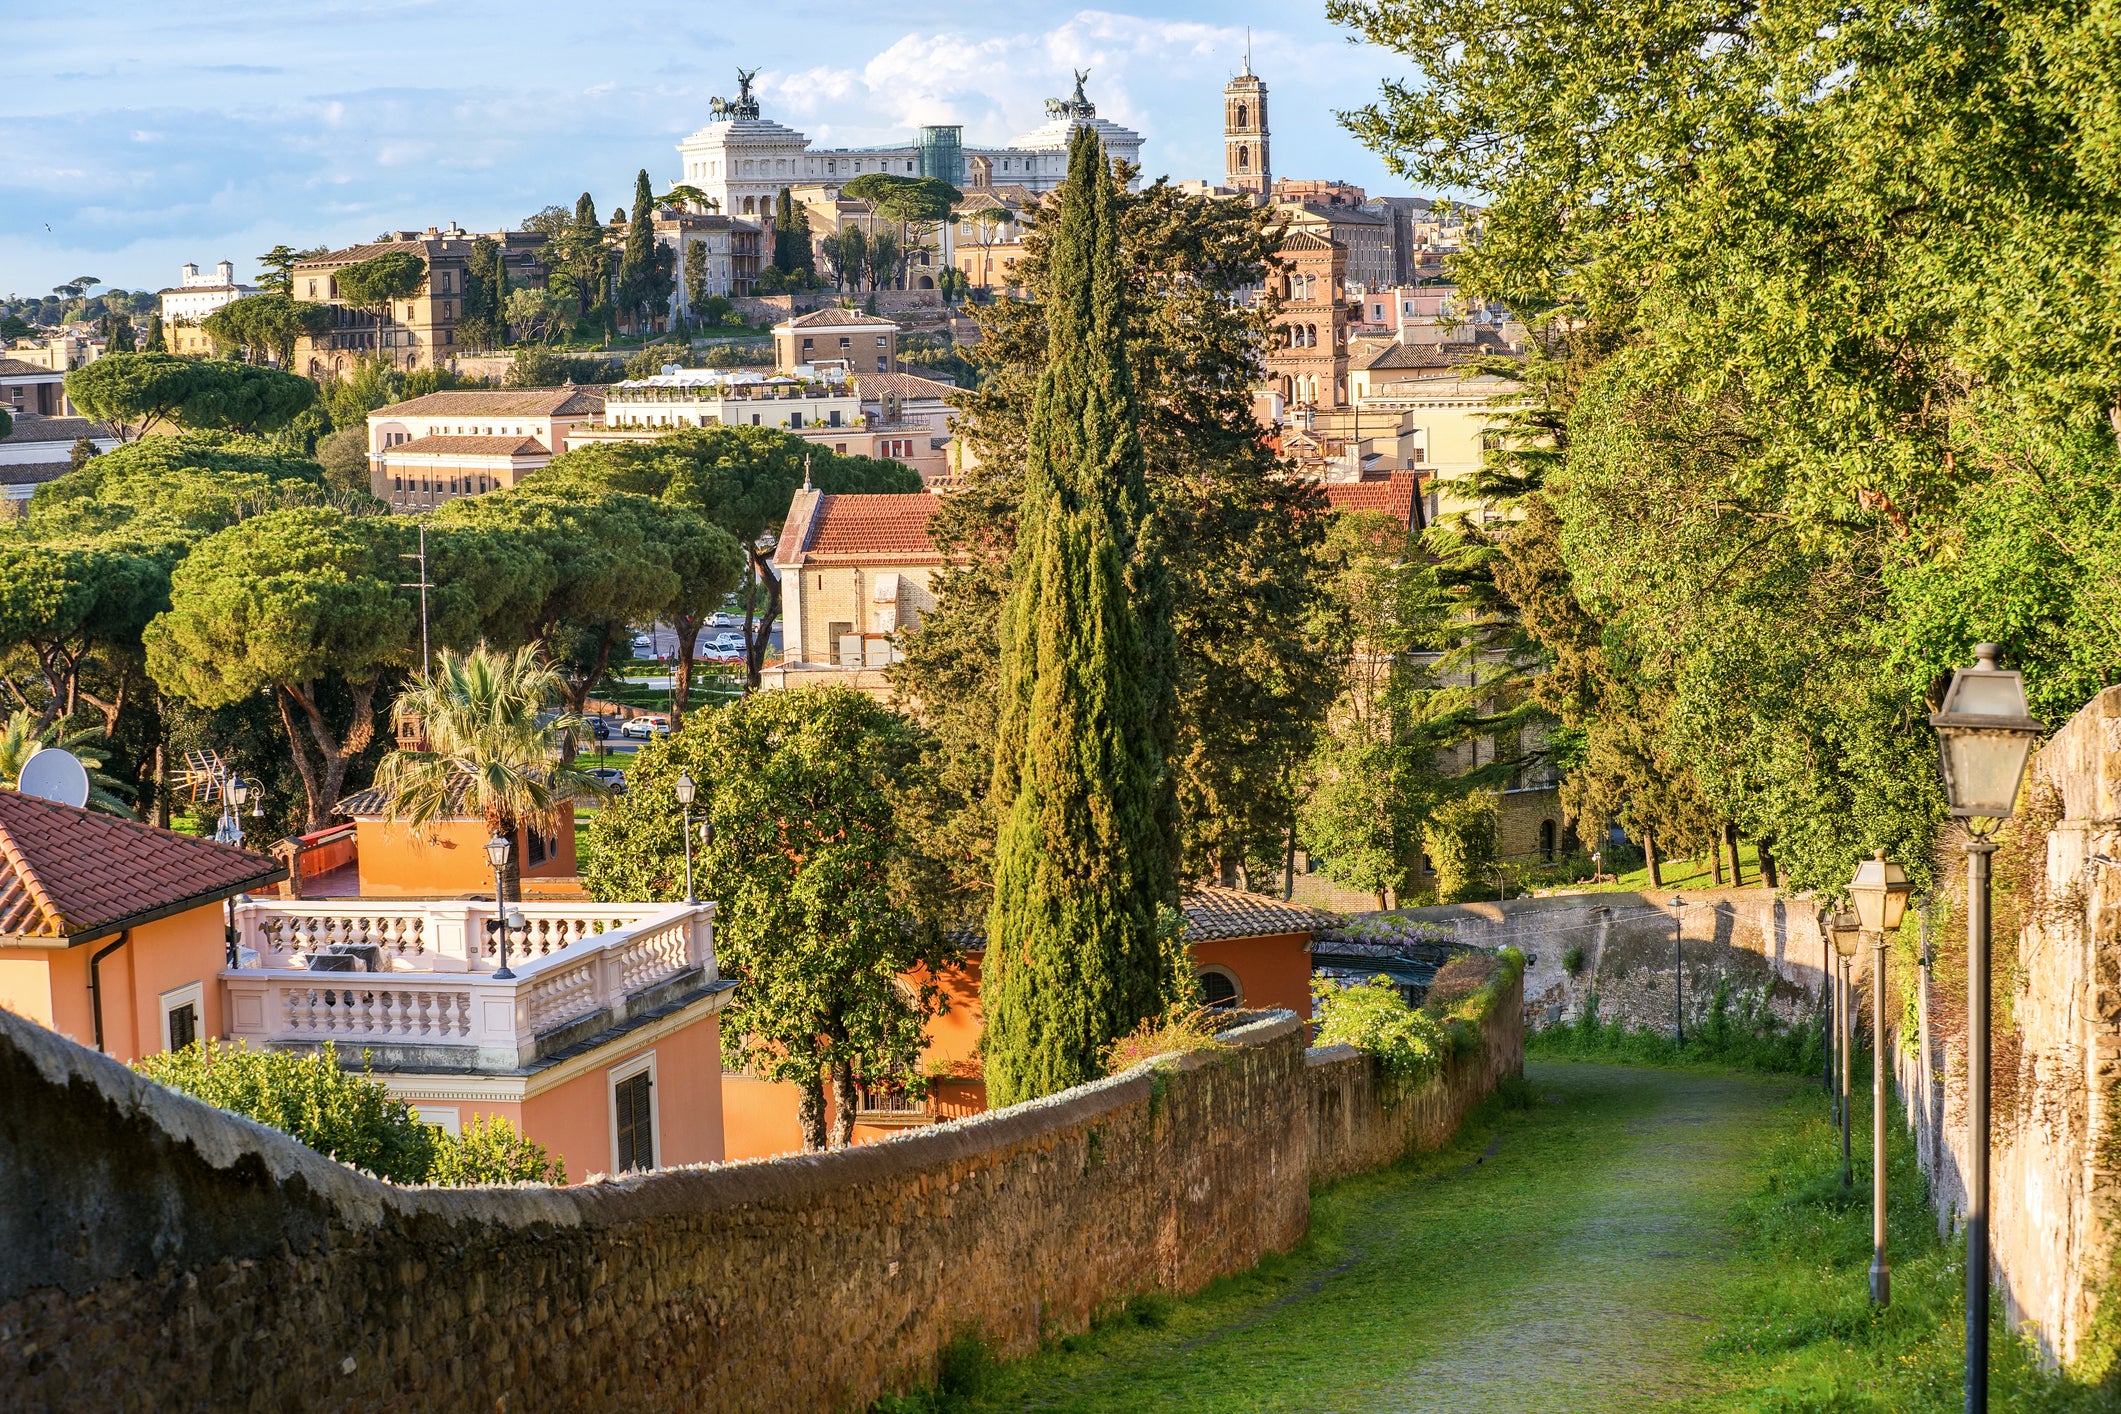 Aventine is the most southerly of Rome’s seven hills